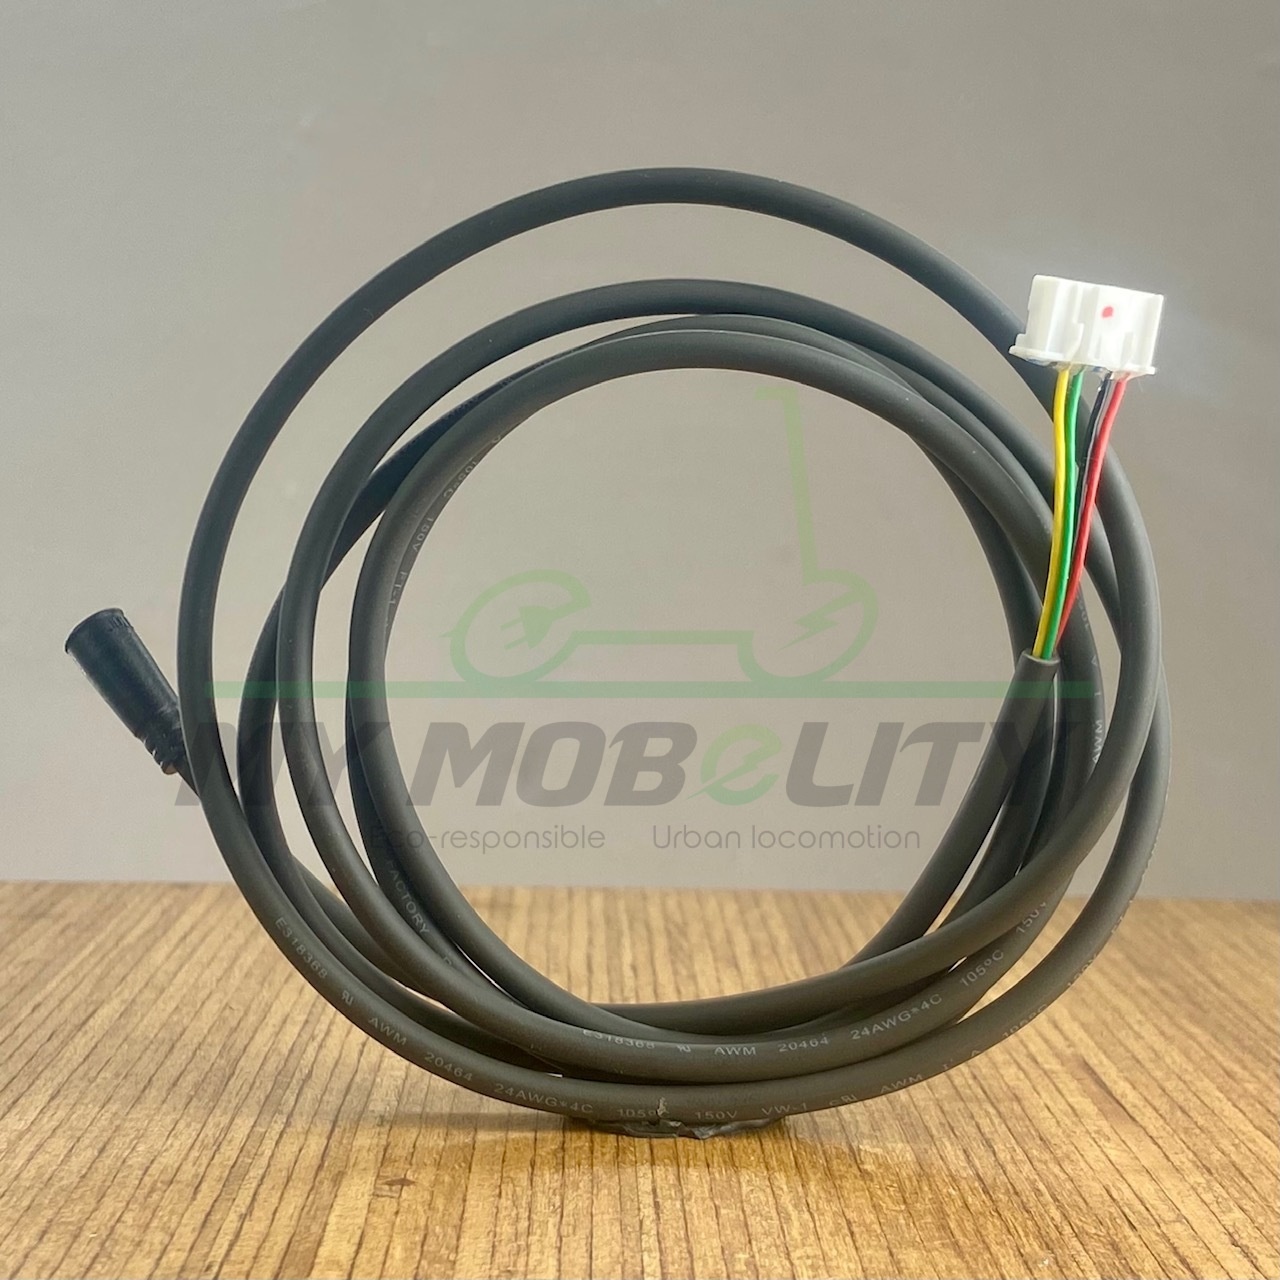 Ninebot Max G30 controller to displauy cable